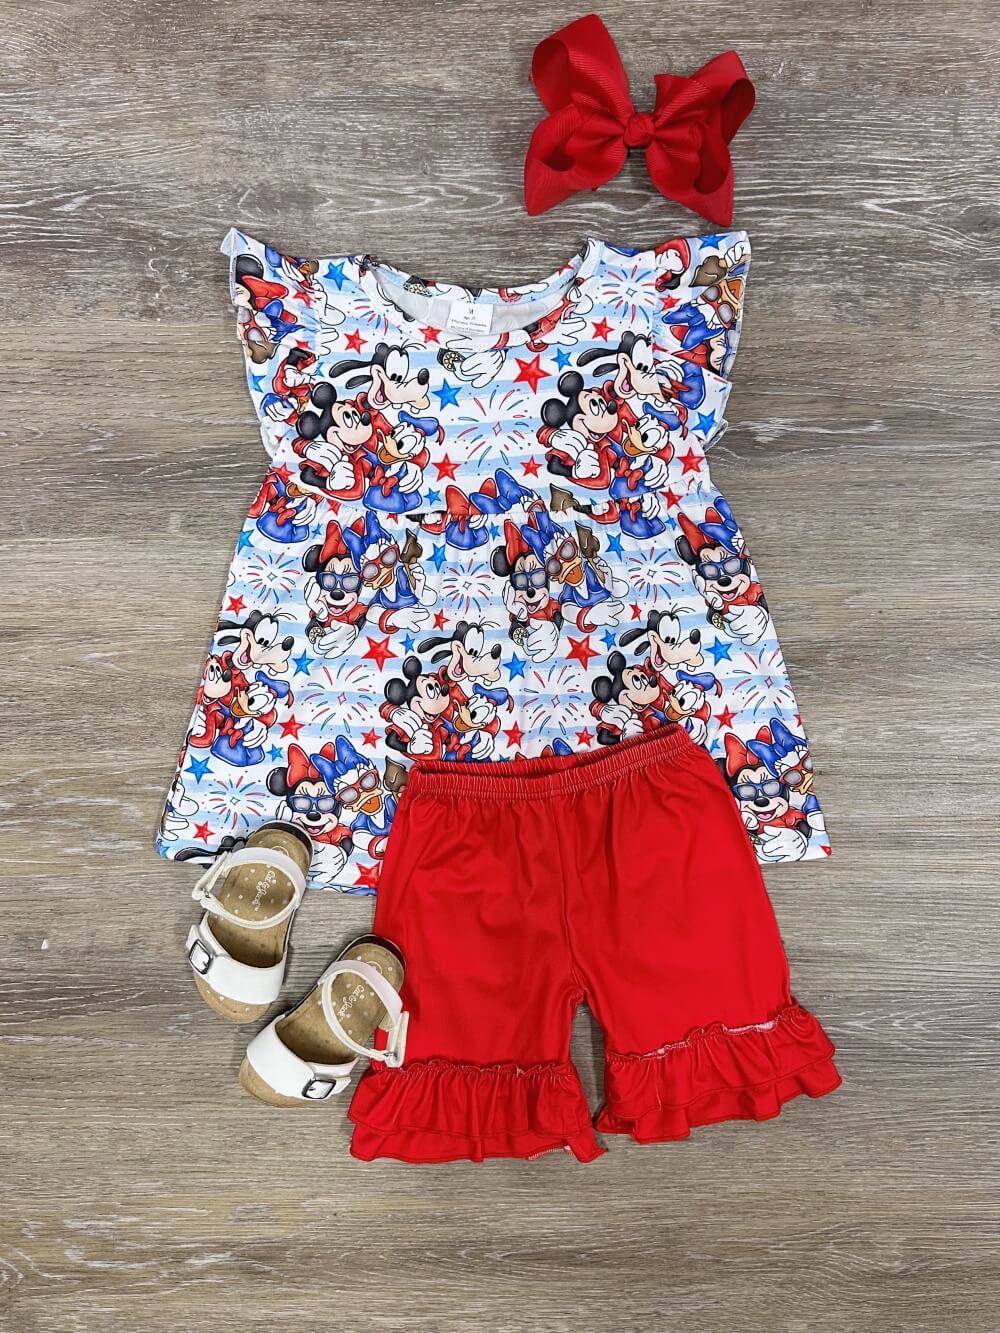 Clubhouse Friends Patriotic Ruffle Girls Shorts Outfit